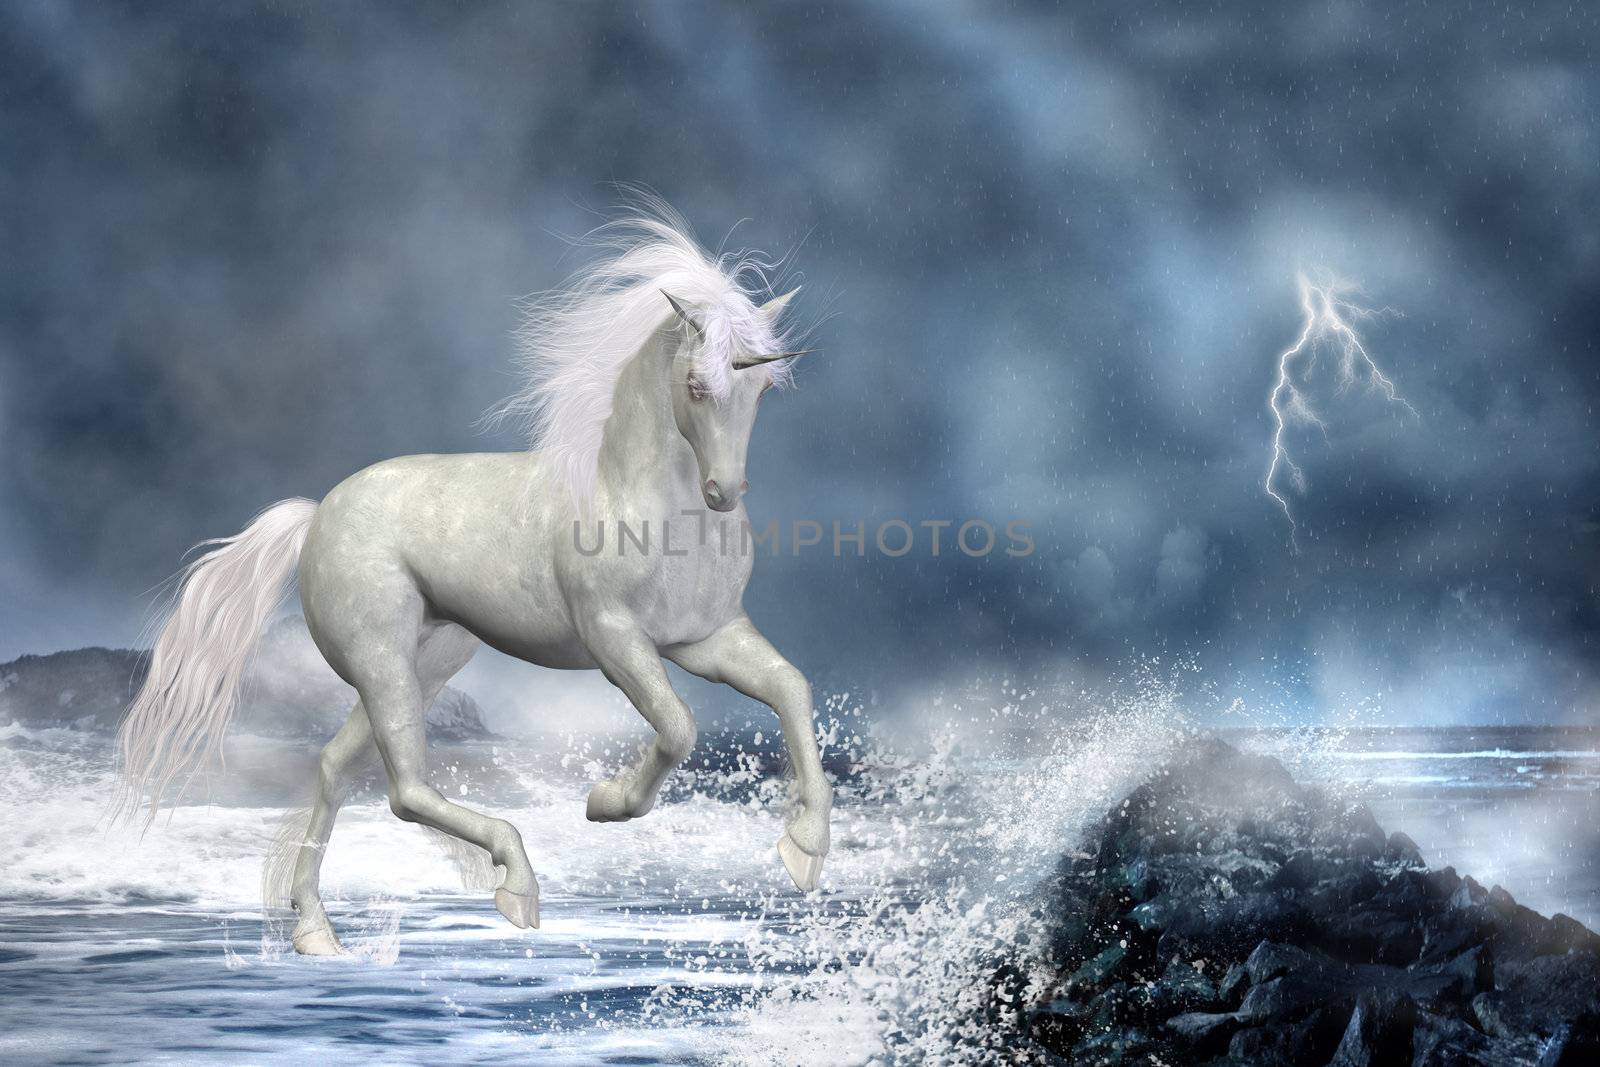 a white Unicorn wading in the water